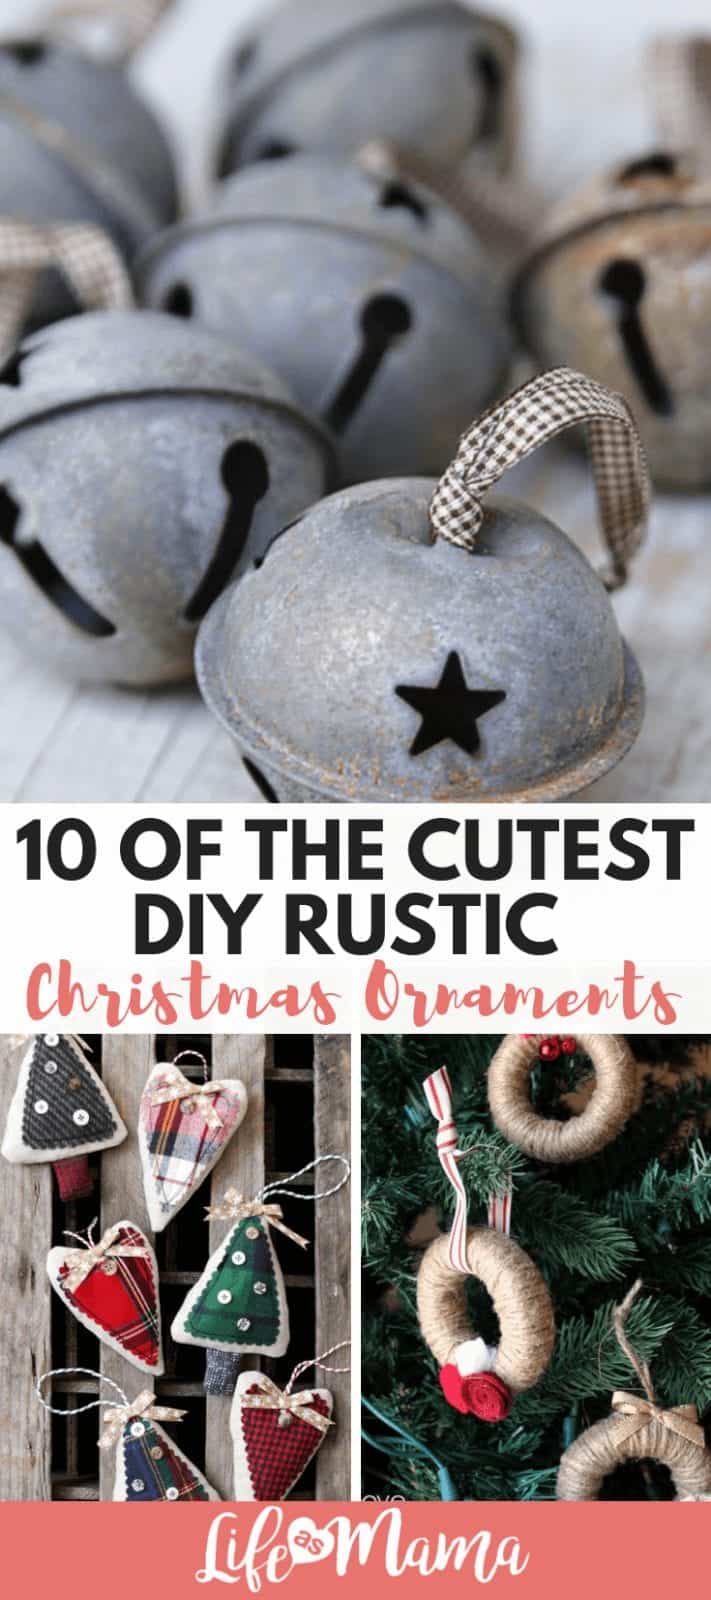 10 Of The Cutest DIY Rustic Christmas Ornaments